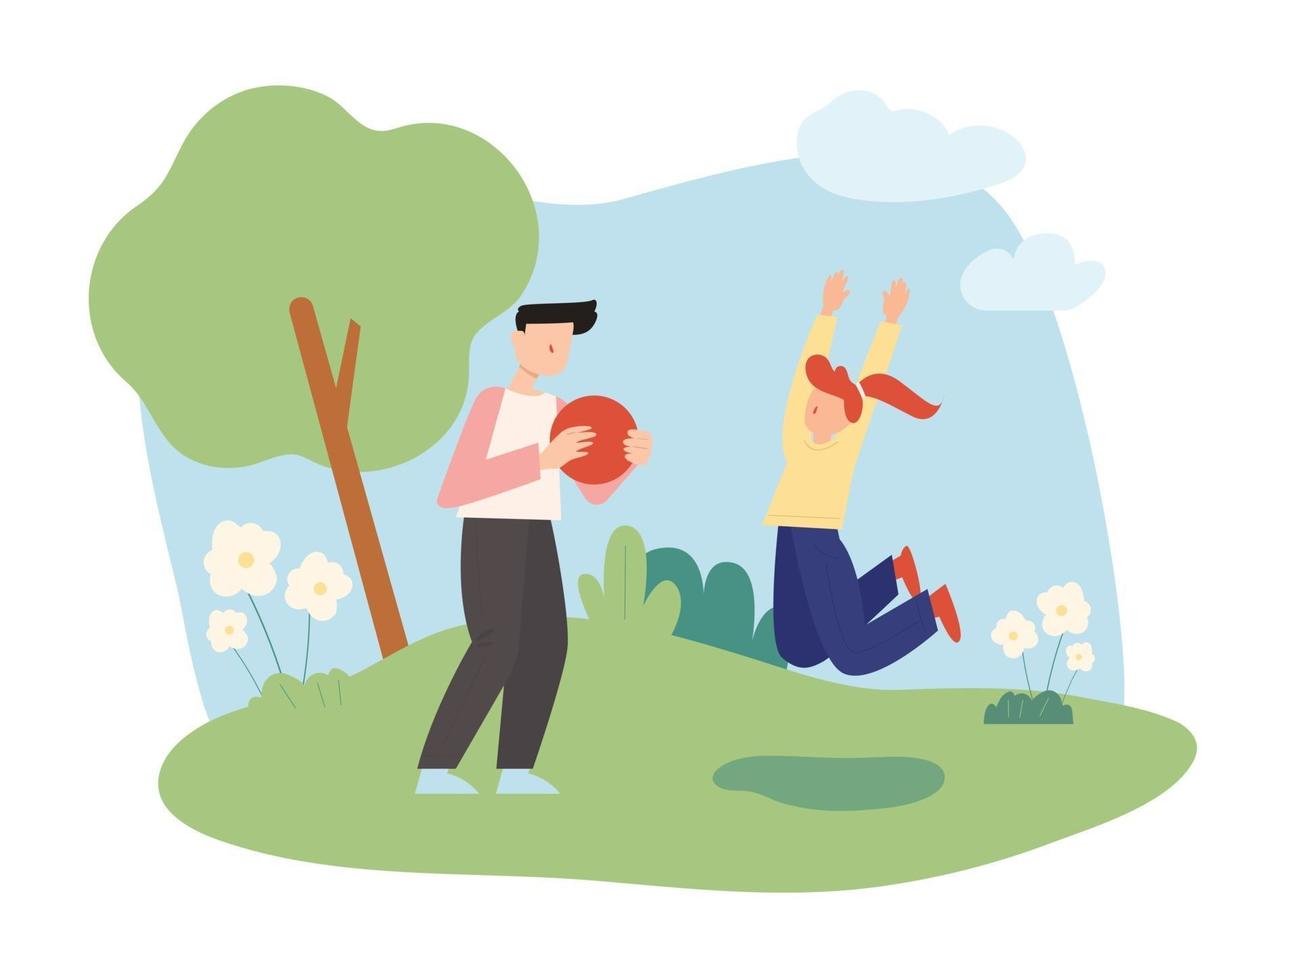 Dad and daughter are having fun playing ball in the park vector